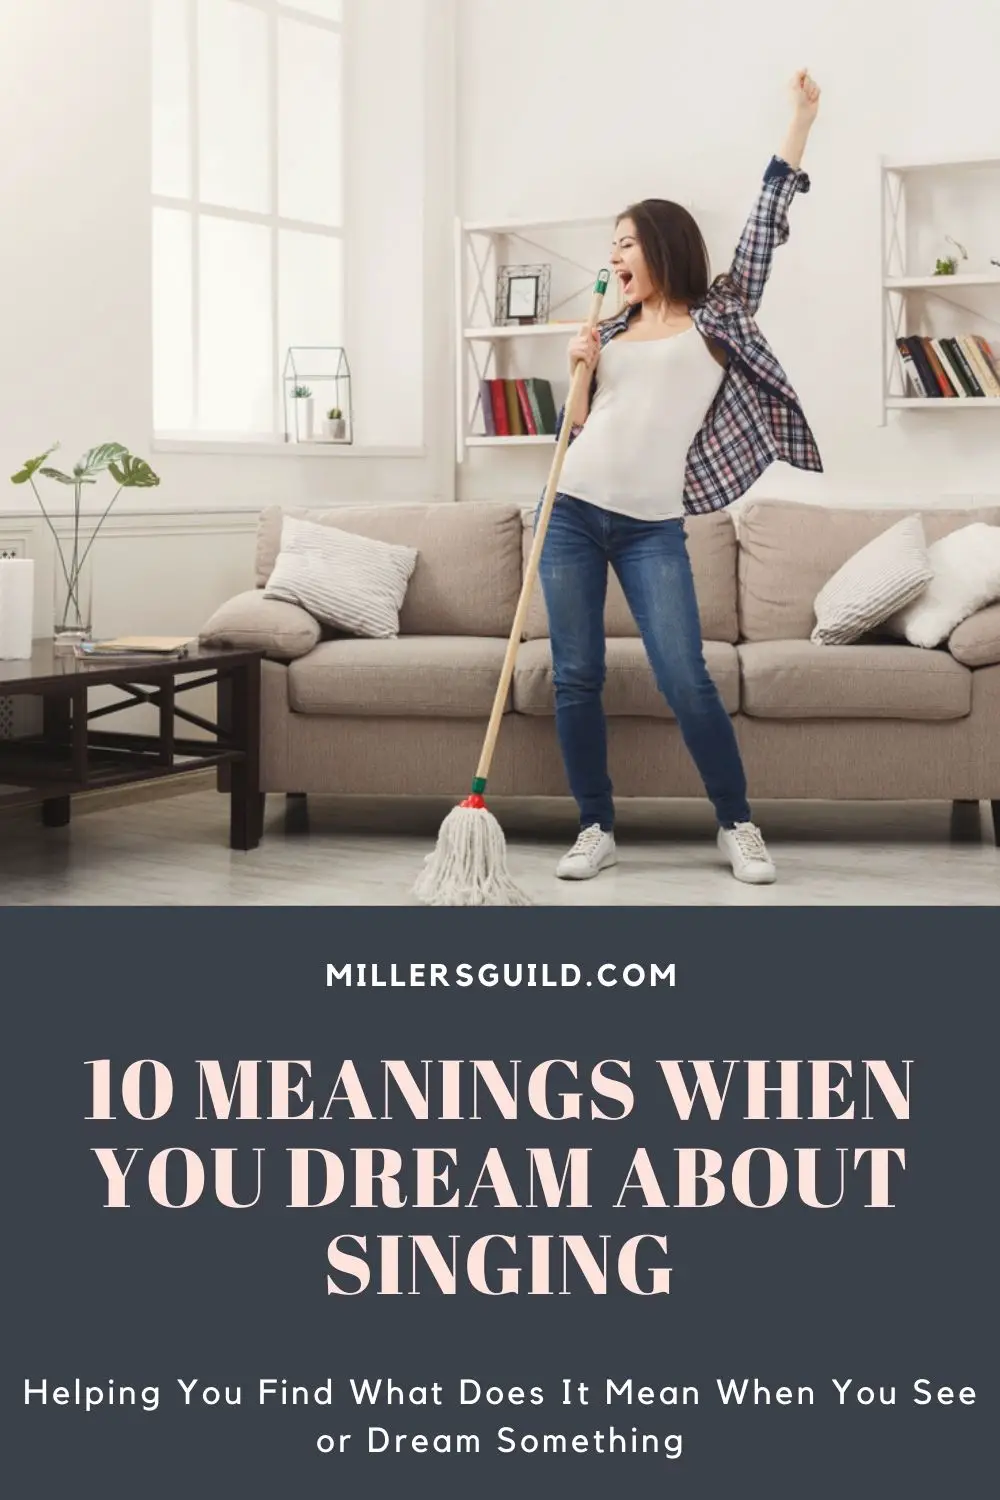 How To Use Singing Dreams To Help In Life